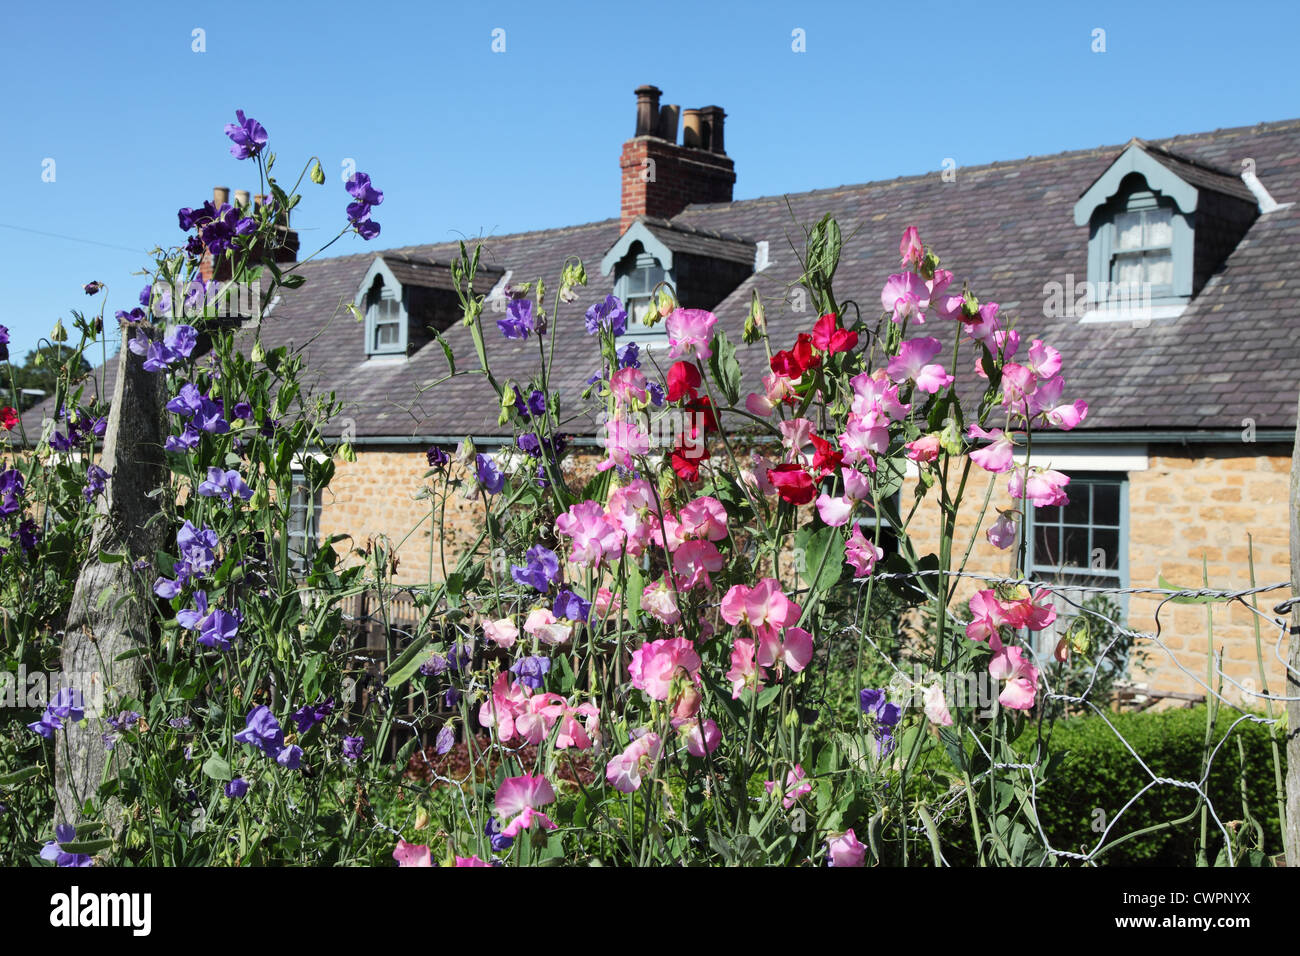 Sweet peas in bloom in the gardens of miners' cottages Beamish Museum, north east England, UK Stock Photo